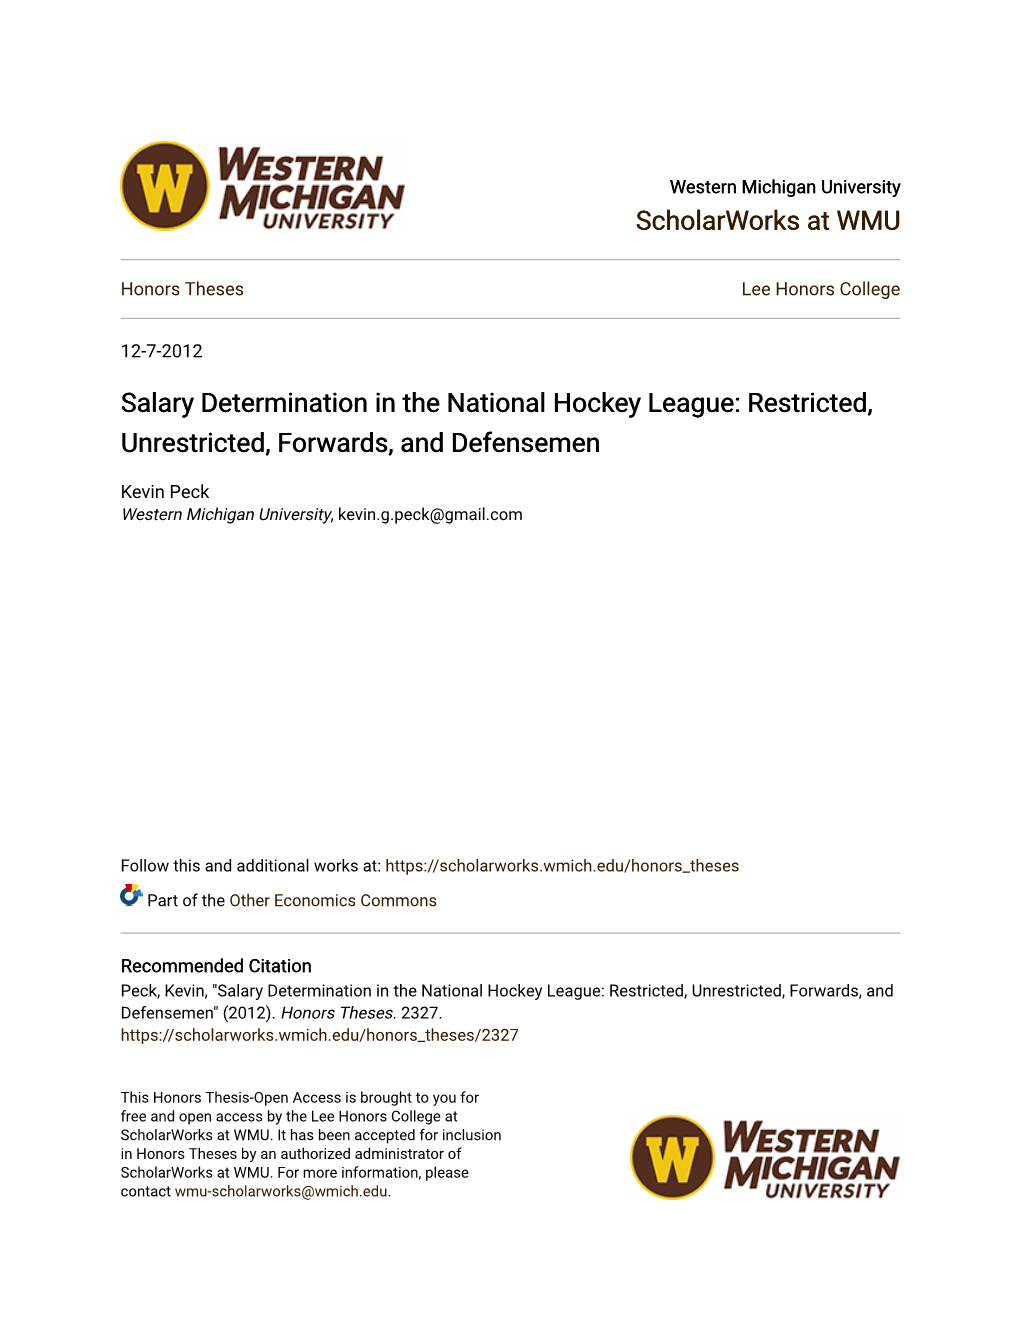 Salary Determination in the National Hockey League: Restricted, Unrestricted, Forwards, and Defensemen